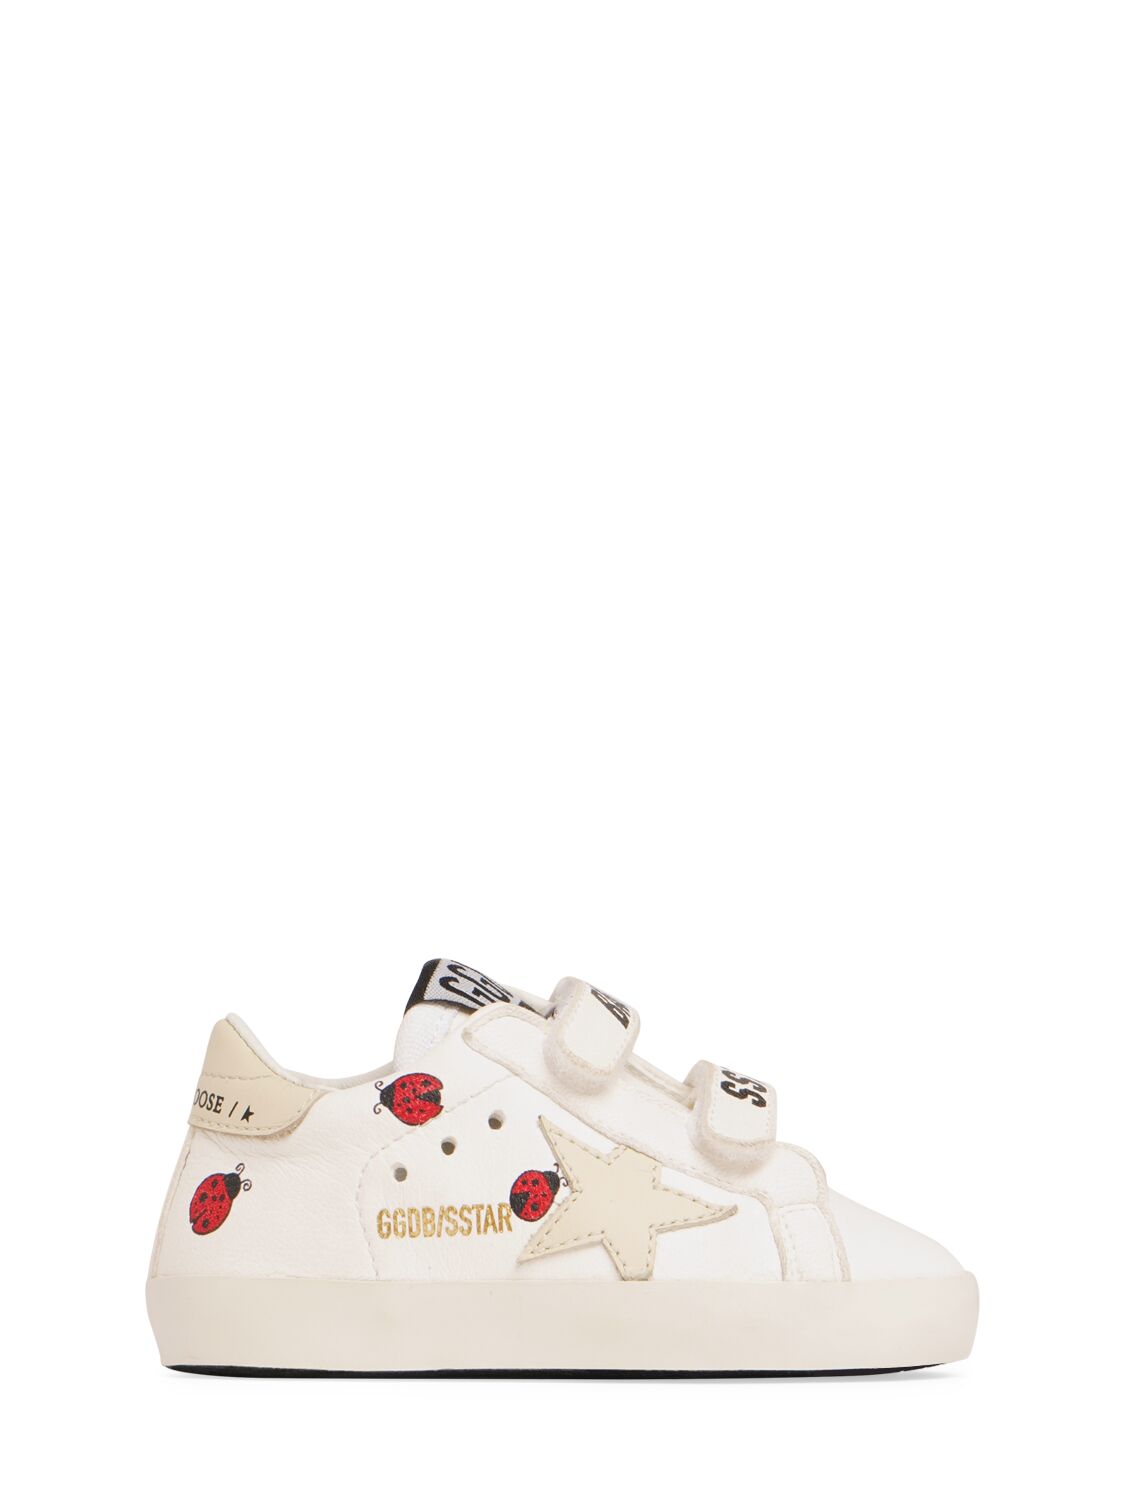 Golden Goose Kids' Napa Leather Pre-walker Shoes In White,ivory